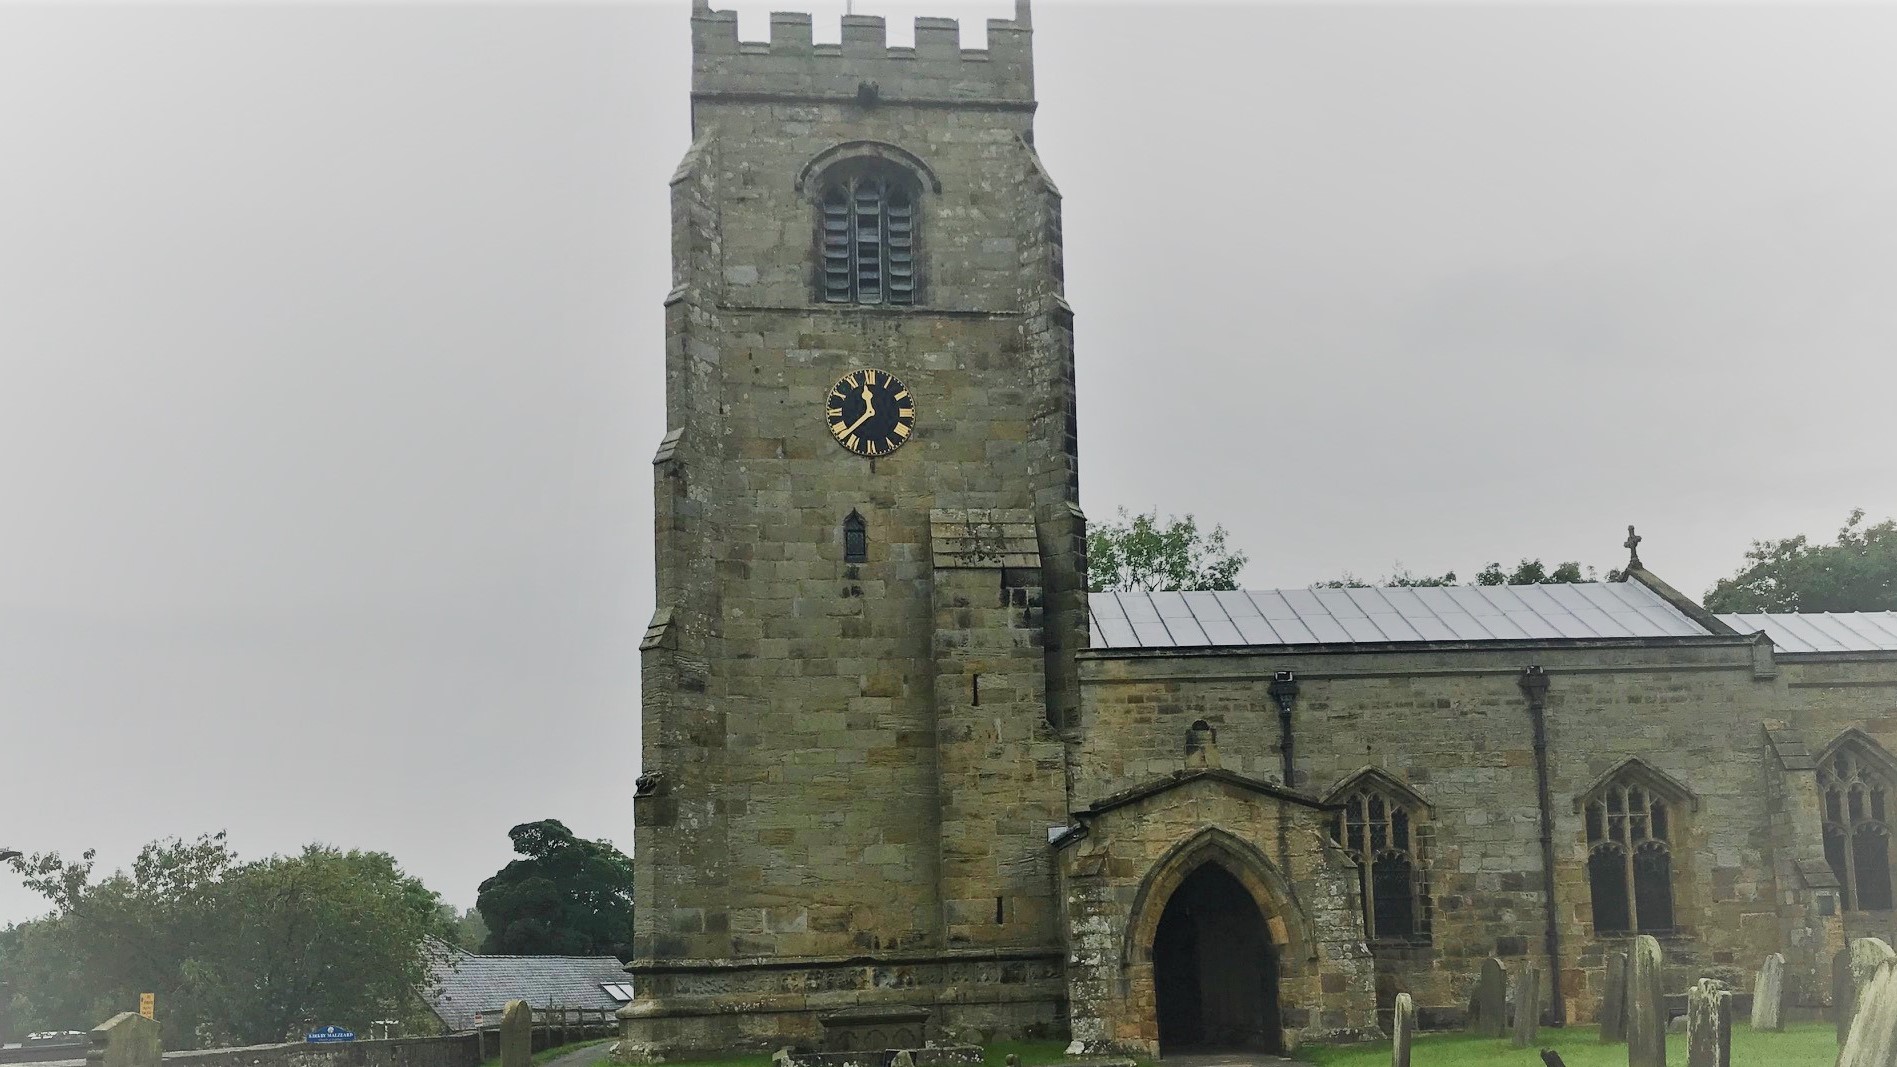 Photograph of St Andrew's Church in Kirkby Malzeard